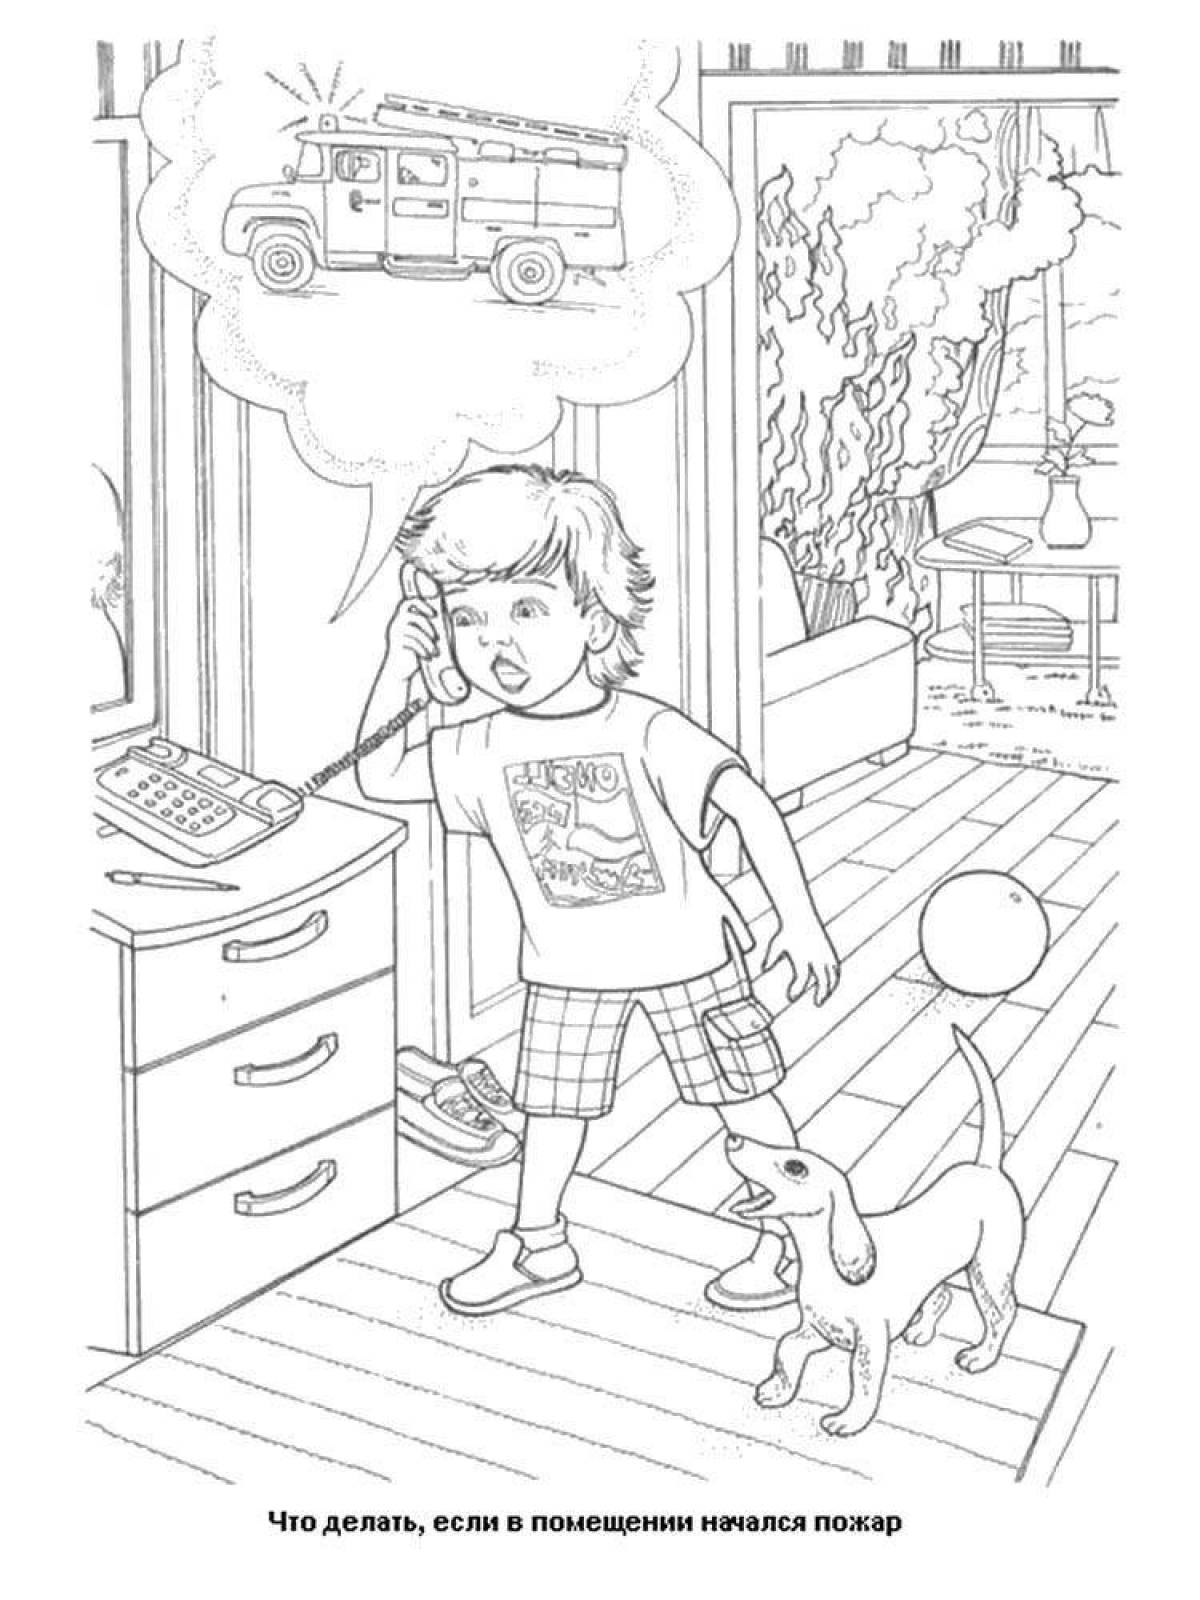 Charming fire safety coloring page